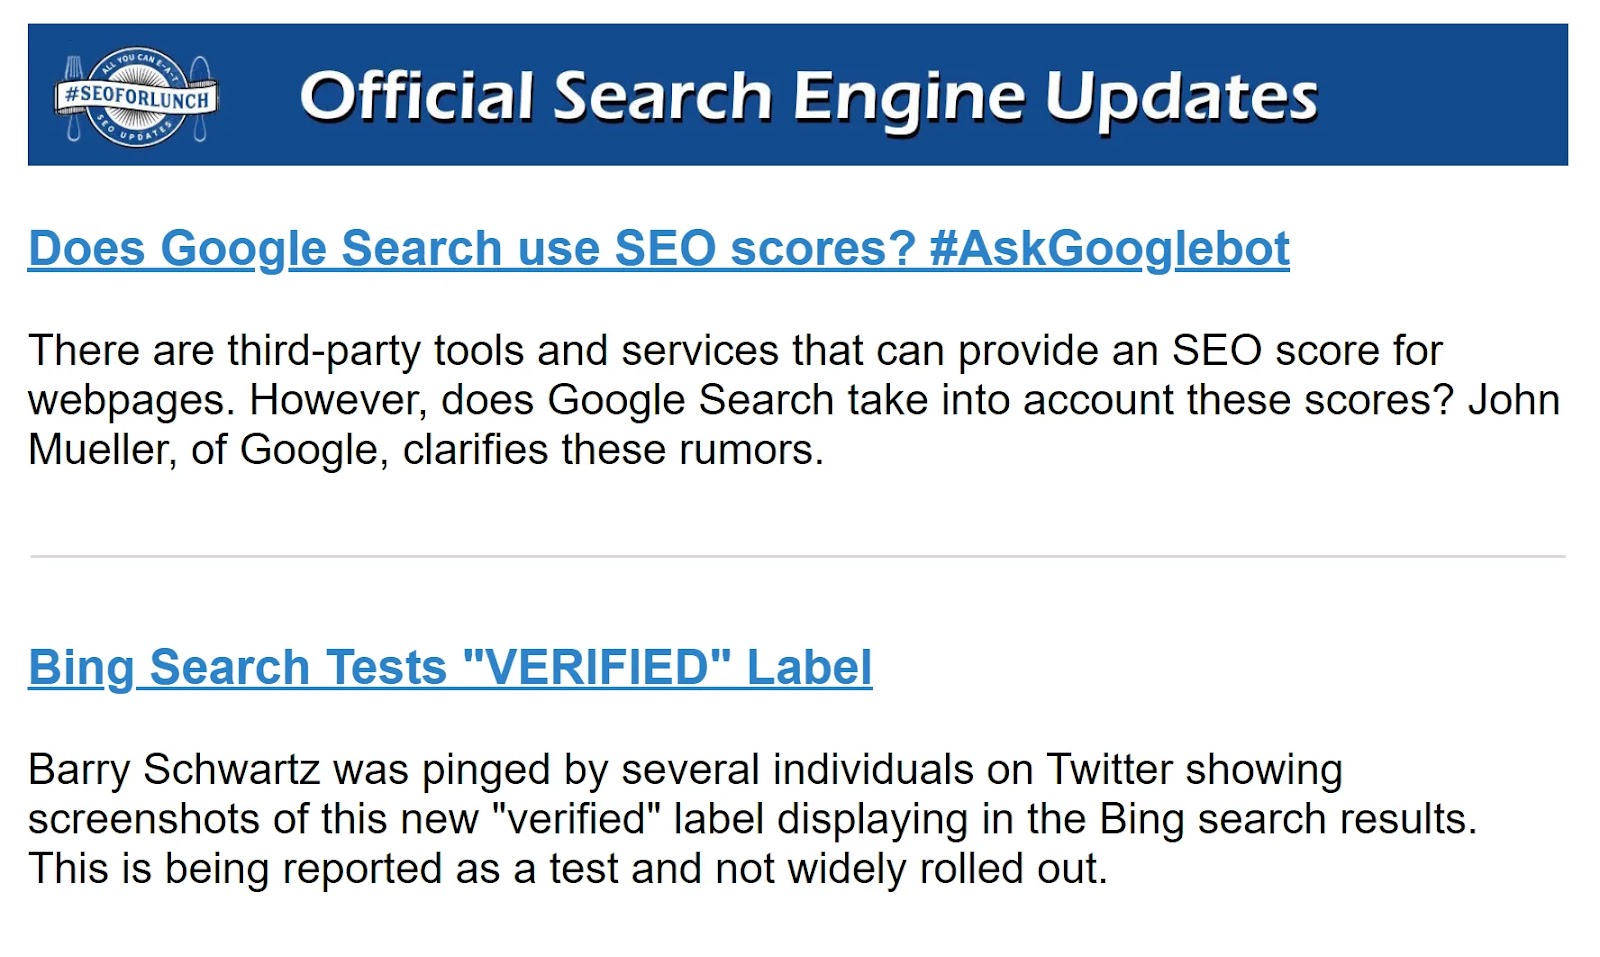 "Official Search Engine Updates" section of #SEOForLunch newsletter